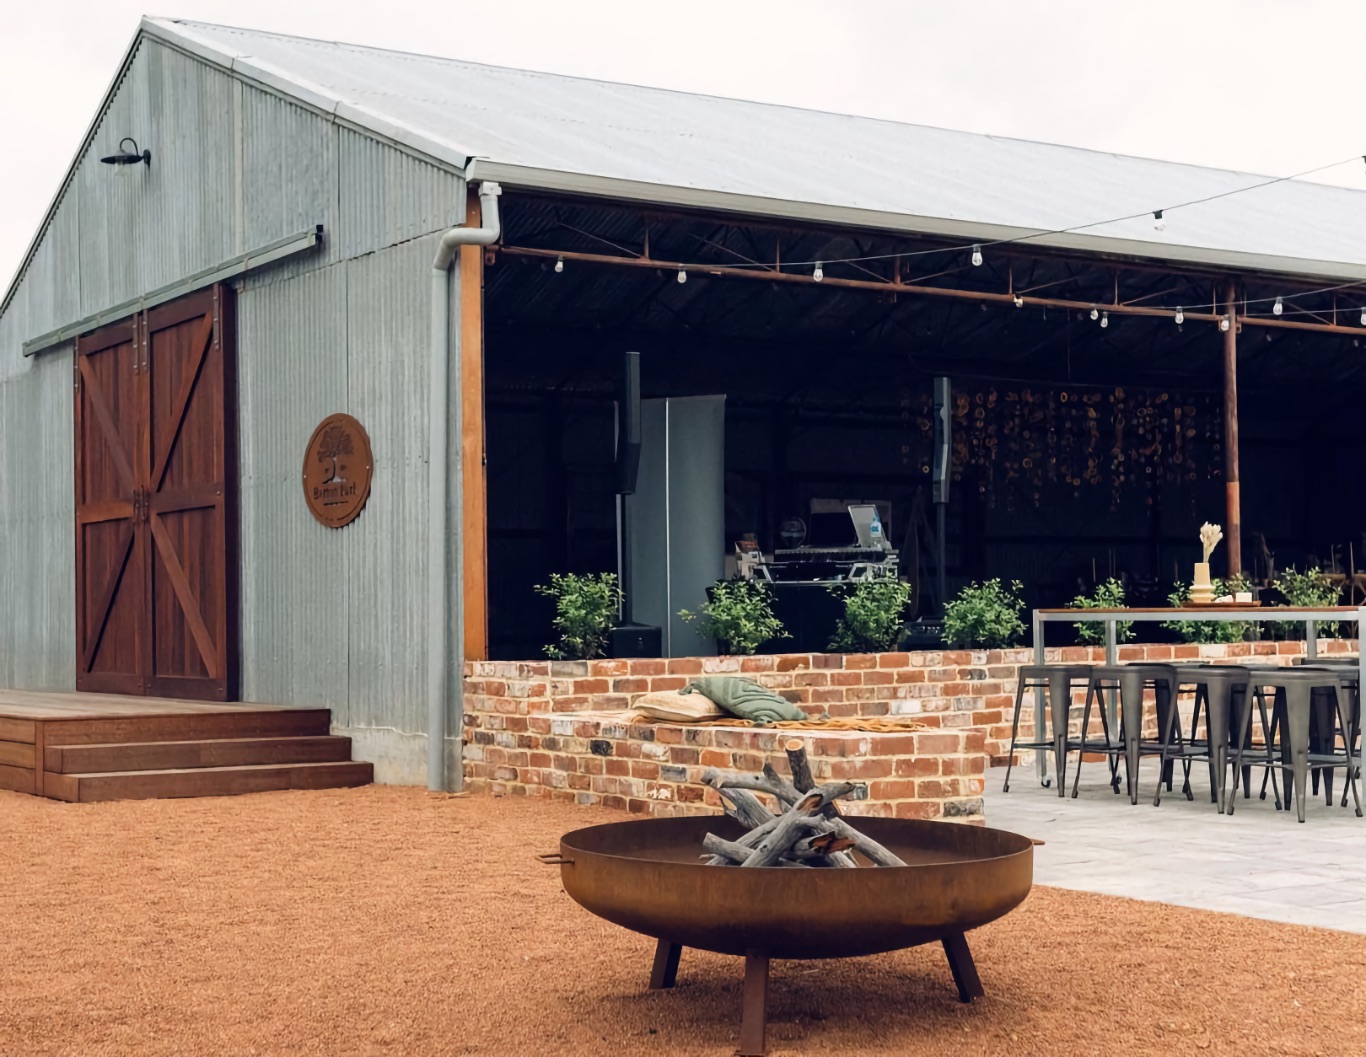 Modern farm barn, with firepit and outdoor table arrangement.